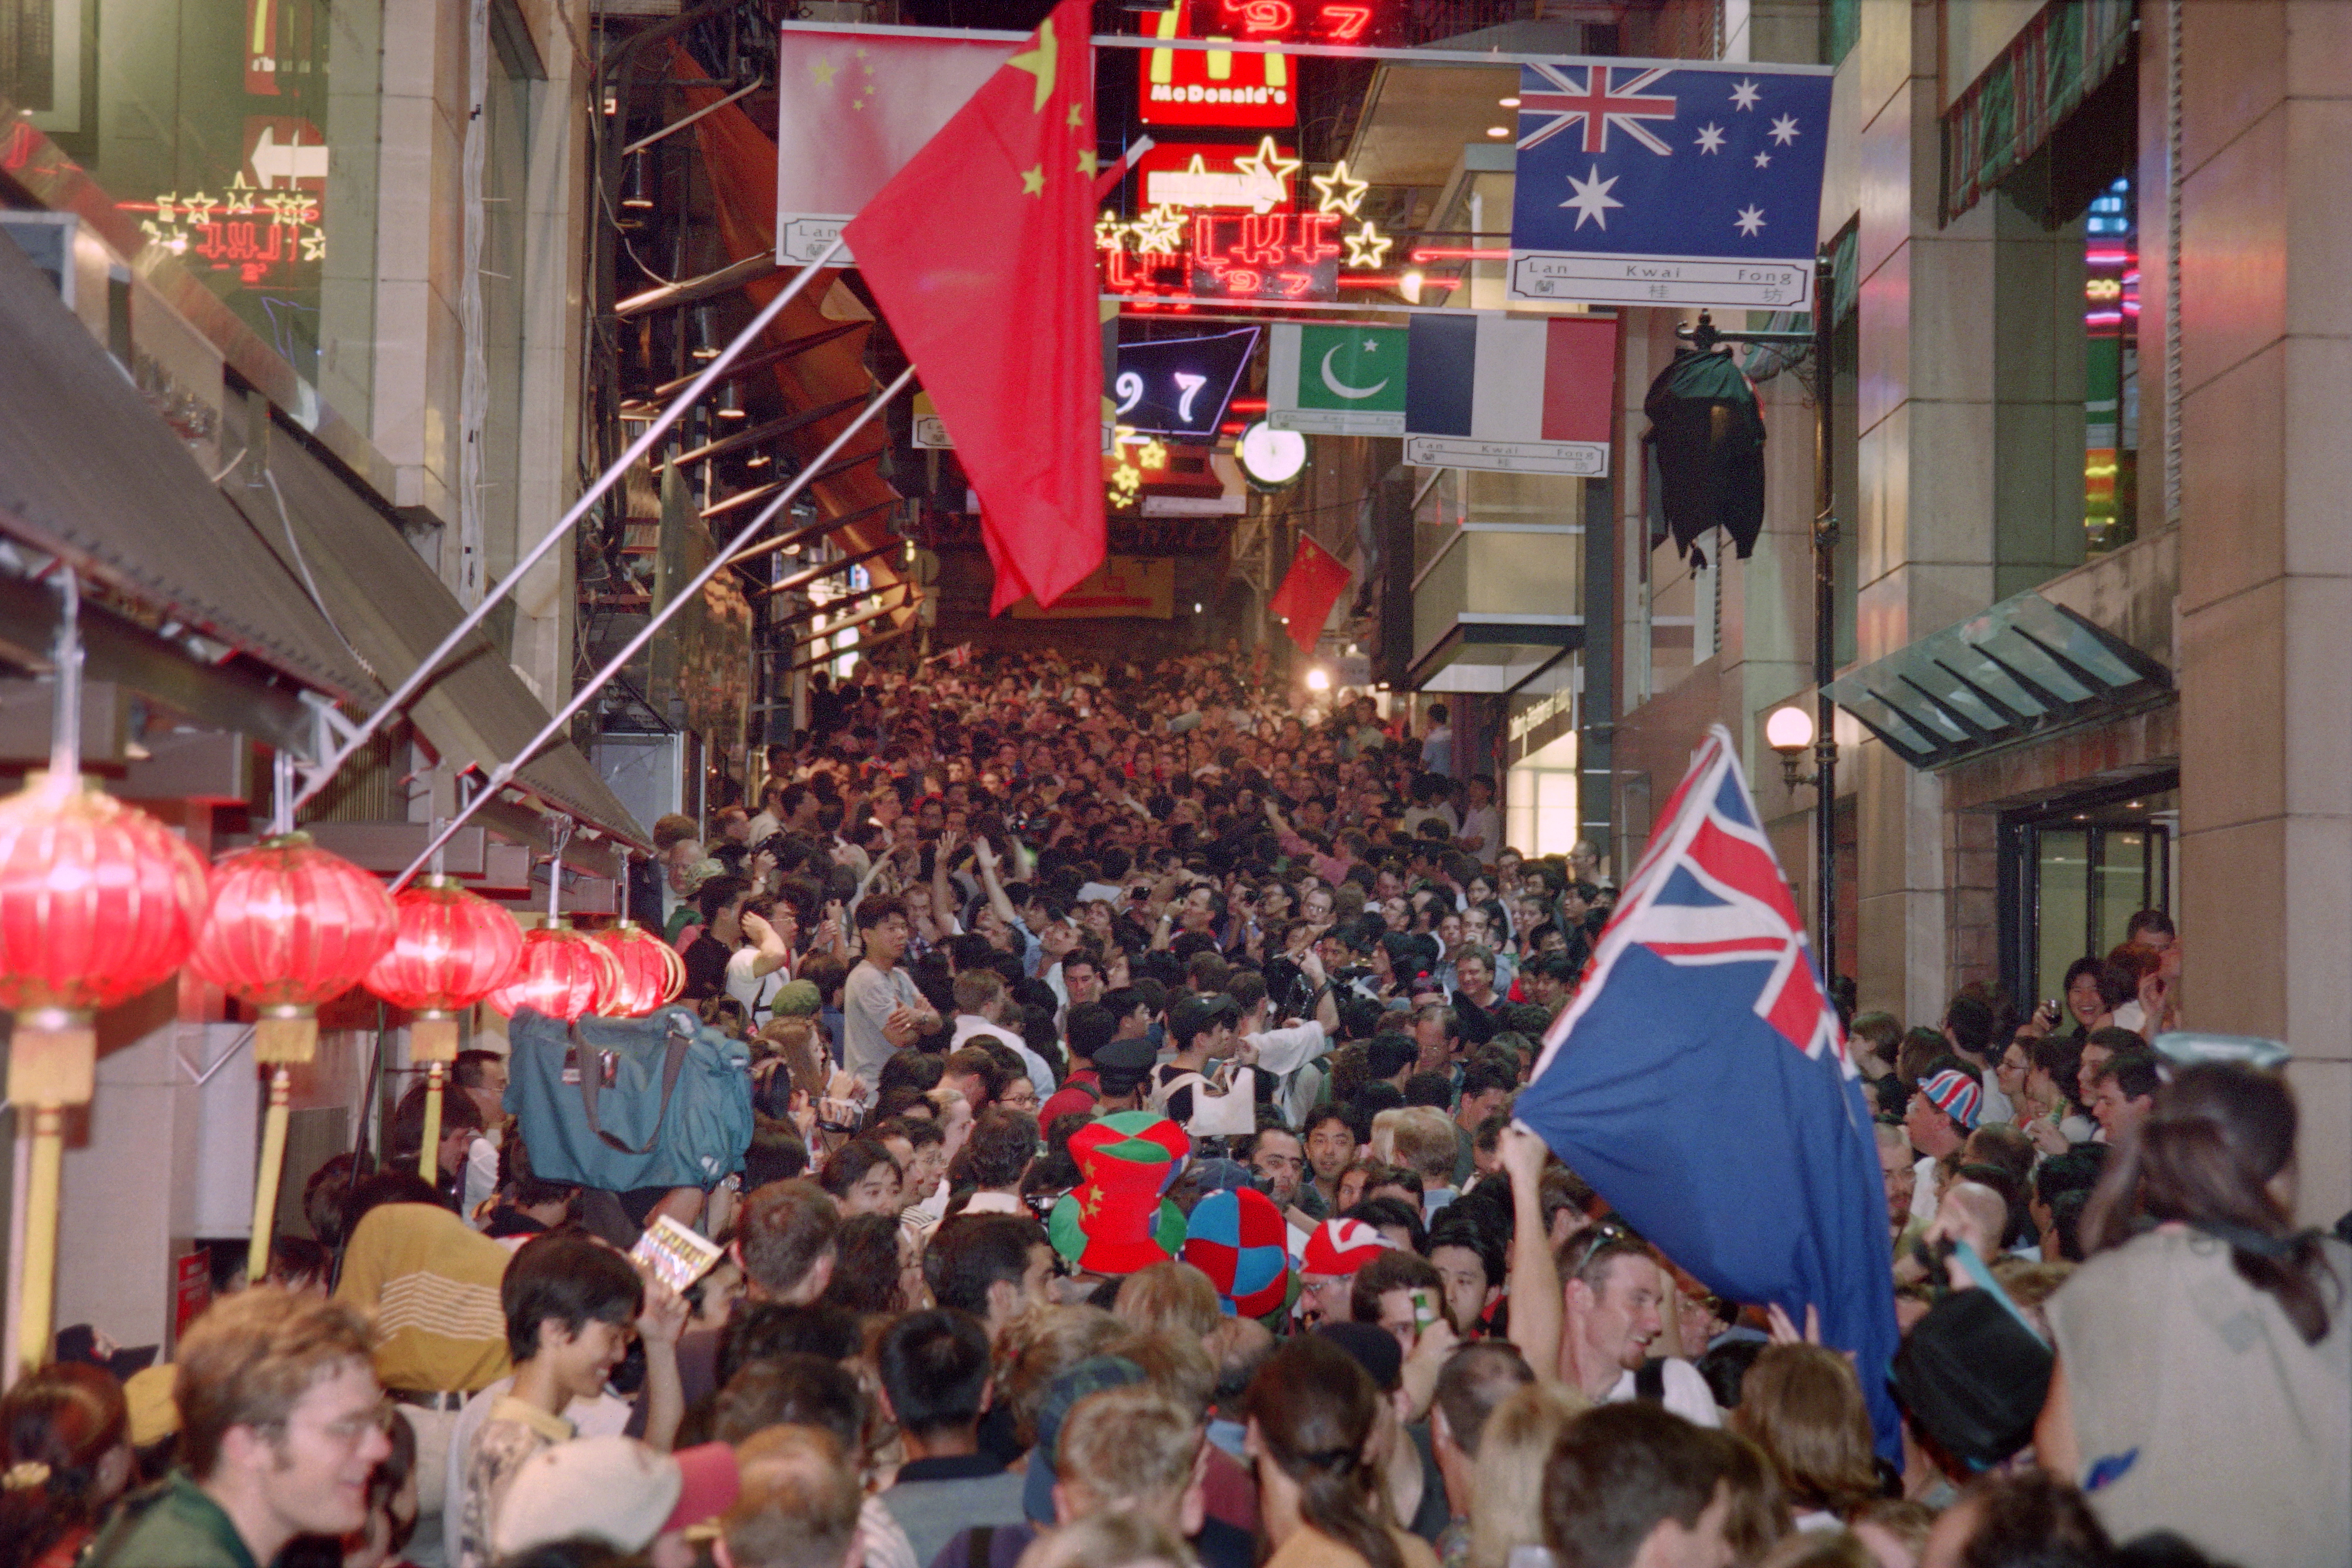 Hong Kong’s Lan Kwai Fong nightlife district in 1997. In 1992, a crowd disaster killed 21 people and prompted a review of crowd control methods in the former British colony. Photo: Peter PARKS / AFP